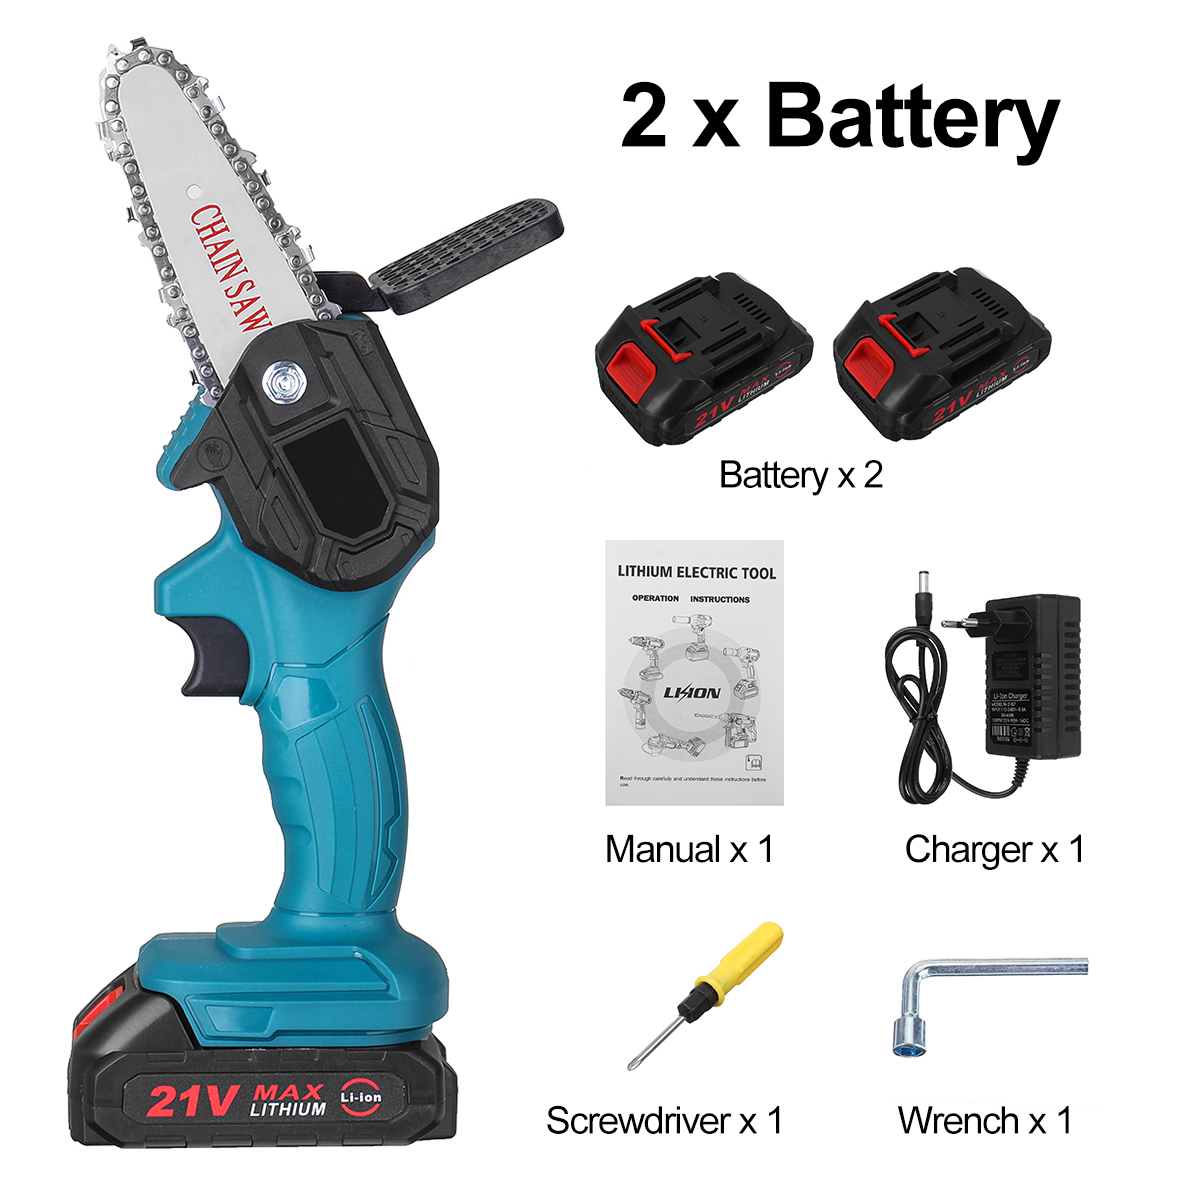 4-Inch-21V-Cordless-Electric-Chain-Saw-W-01pc2pcs-Batteries-For-Tree-Branch-Wood-Cutting-Tool-1805148-13